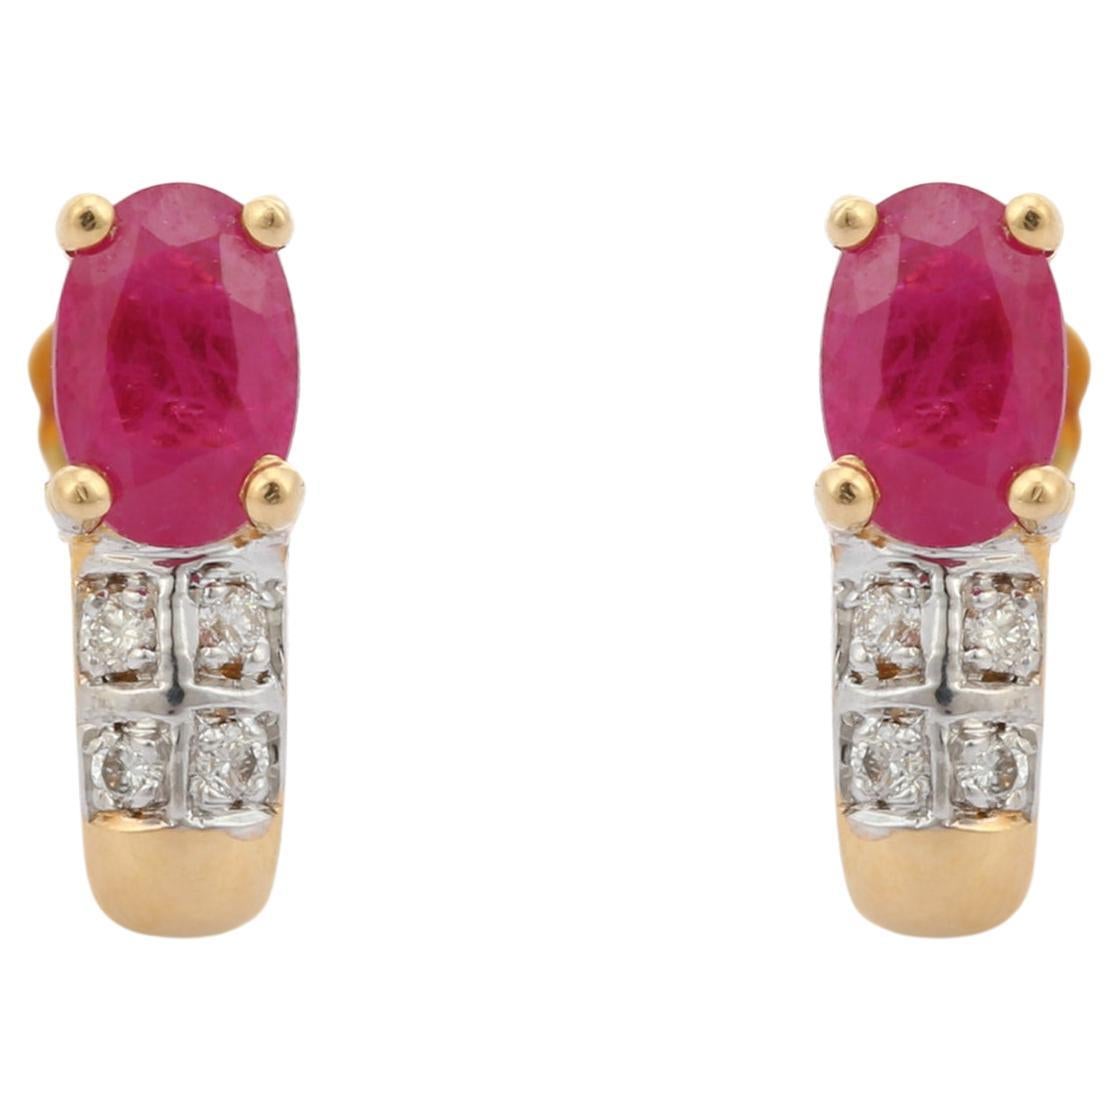 18K Yellow Gold 1.4 Ct Ruby and Diamond Stud Earrings, Ruby Earrings for Her